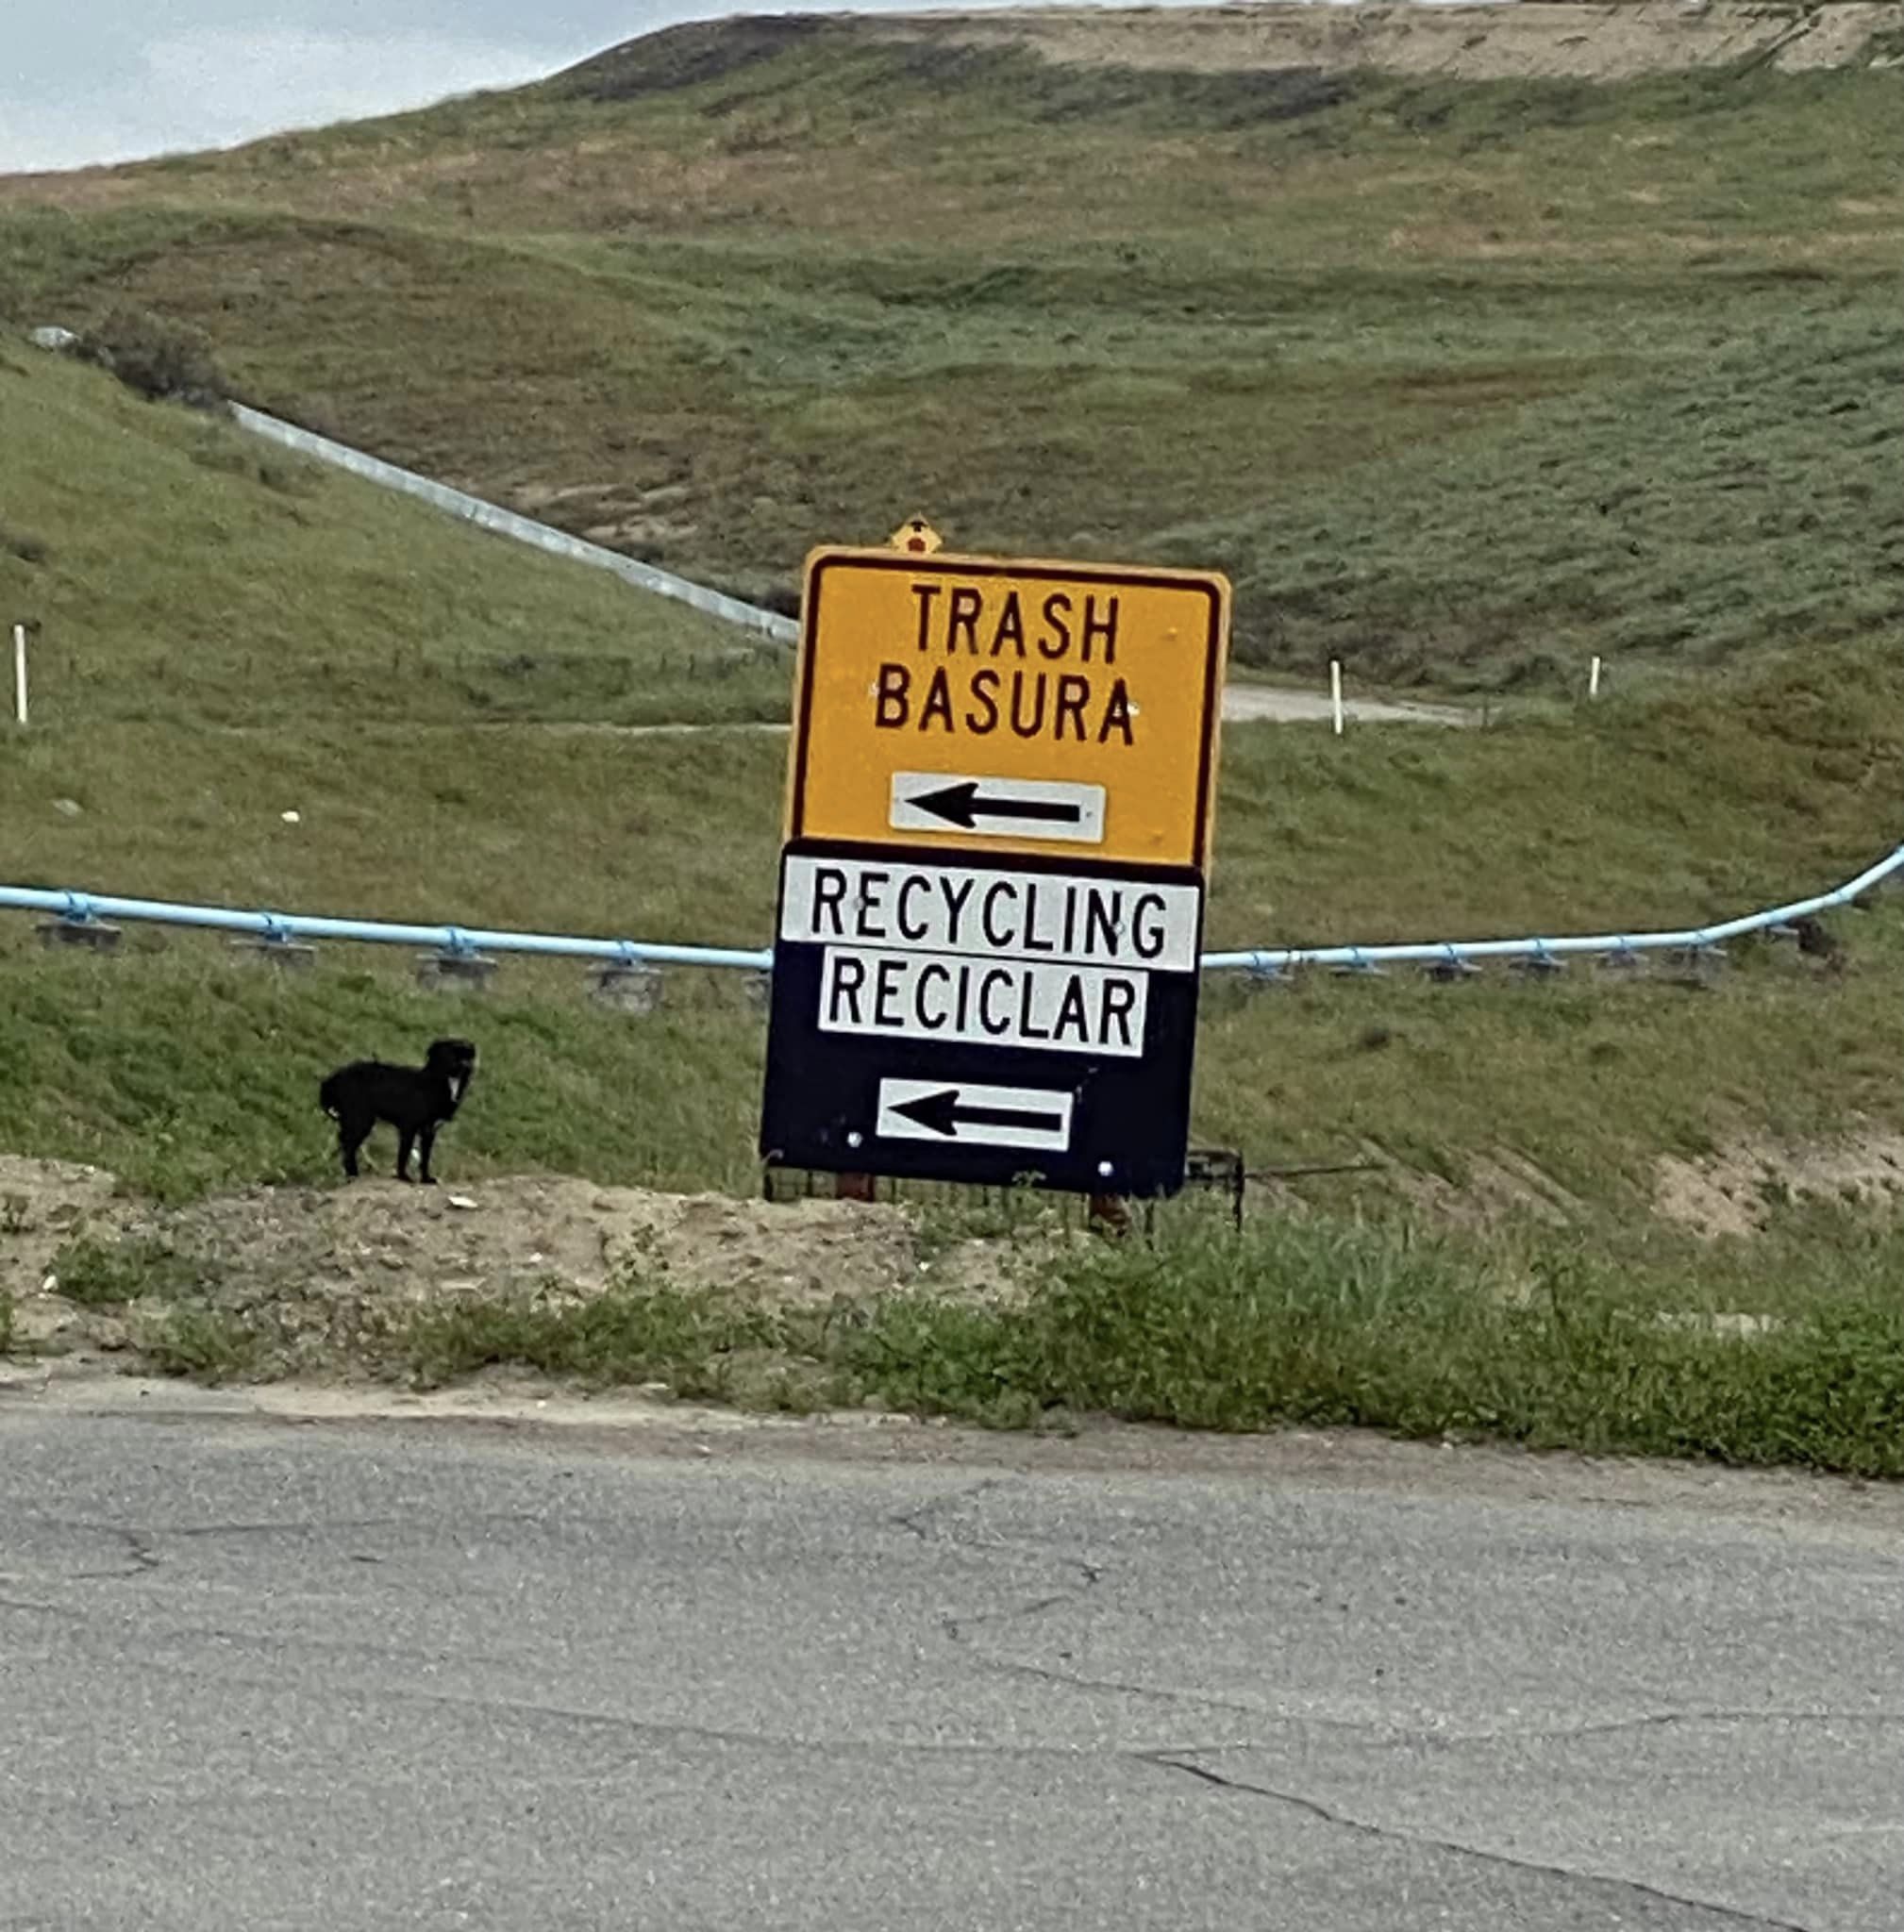 black dog standing next to a recycling sign